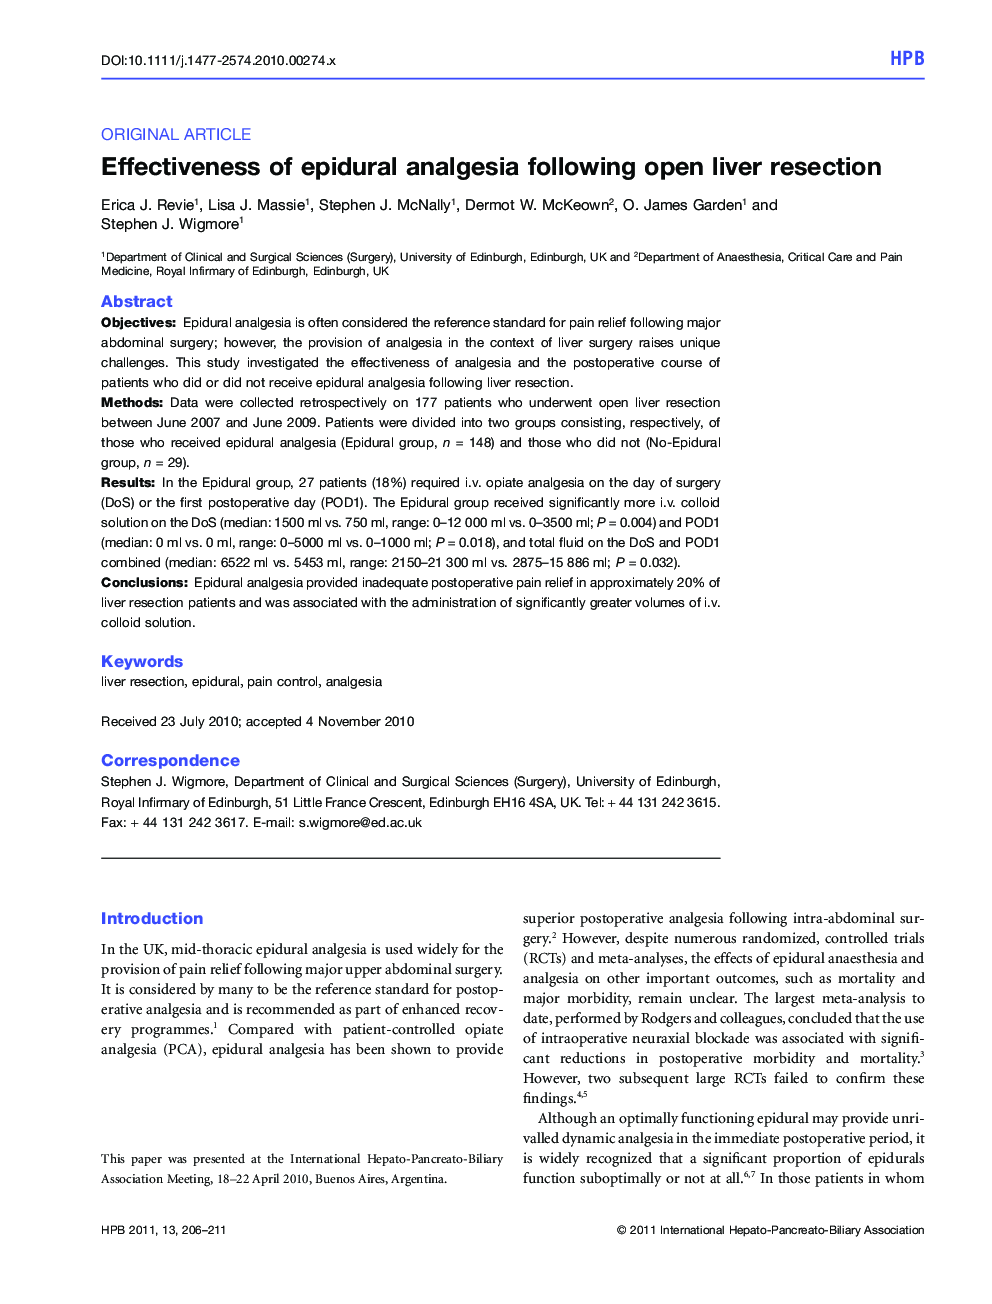 Effectiveness of epidural analgesia following open liver resection